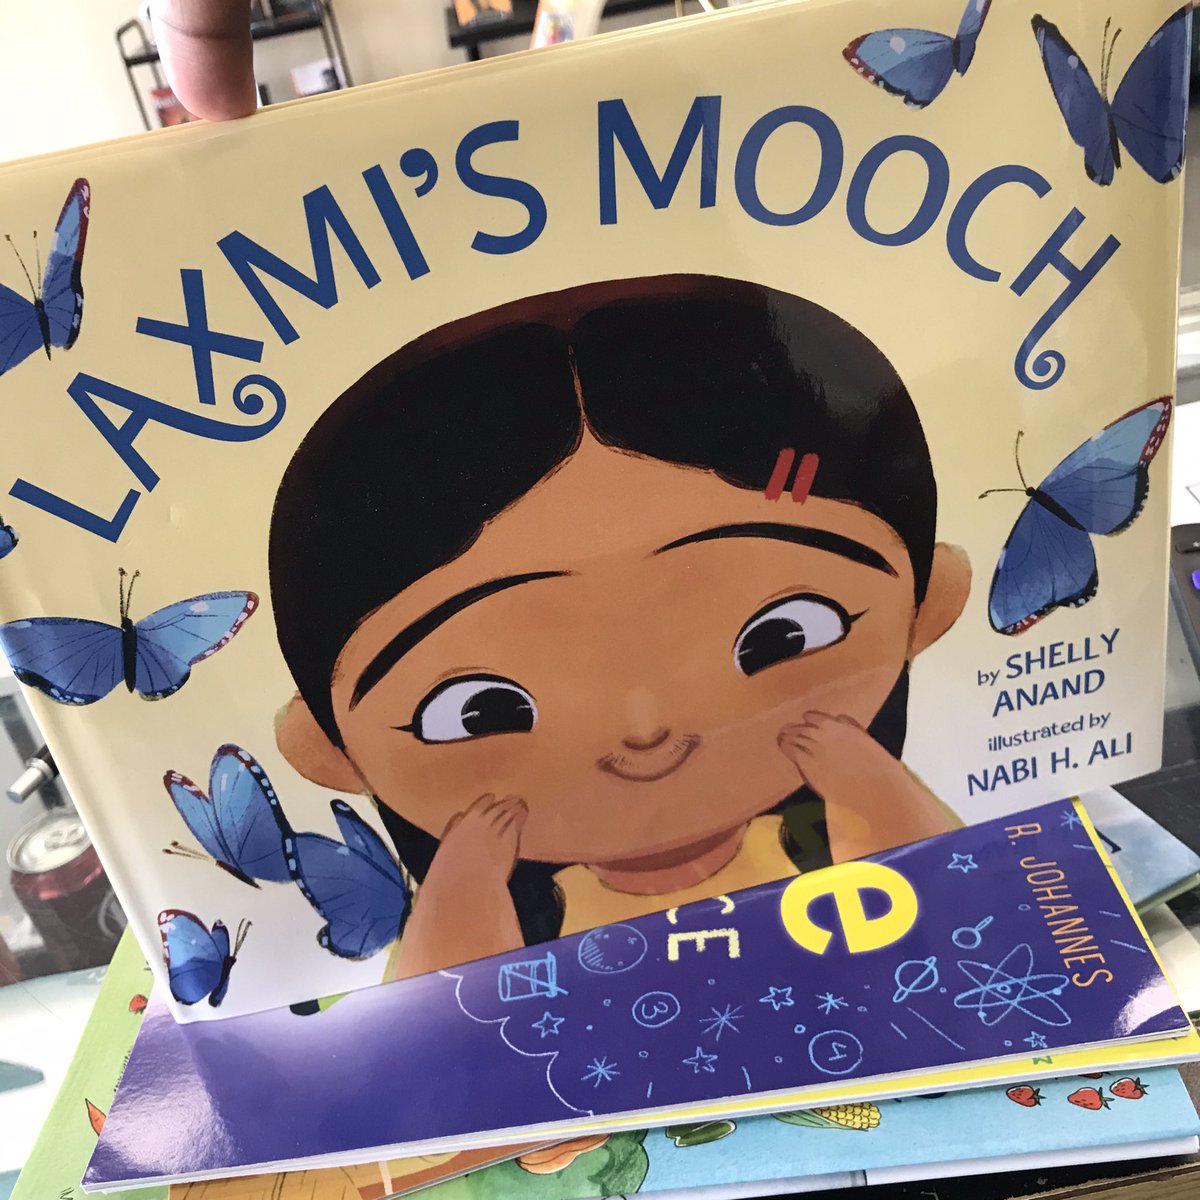 New to our shelves and online store: #LaxmisMooch by #ShellyAnand! You can grab a copy in-store or you can order your copy of the books on our website at demoir-books.square.site ☺️📚